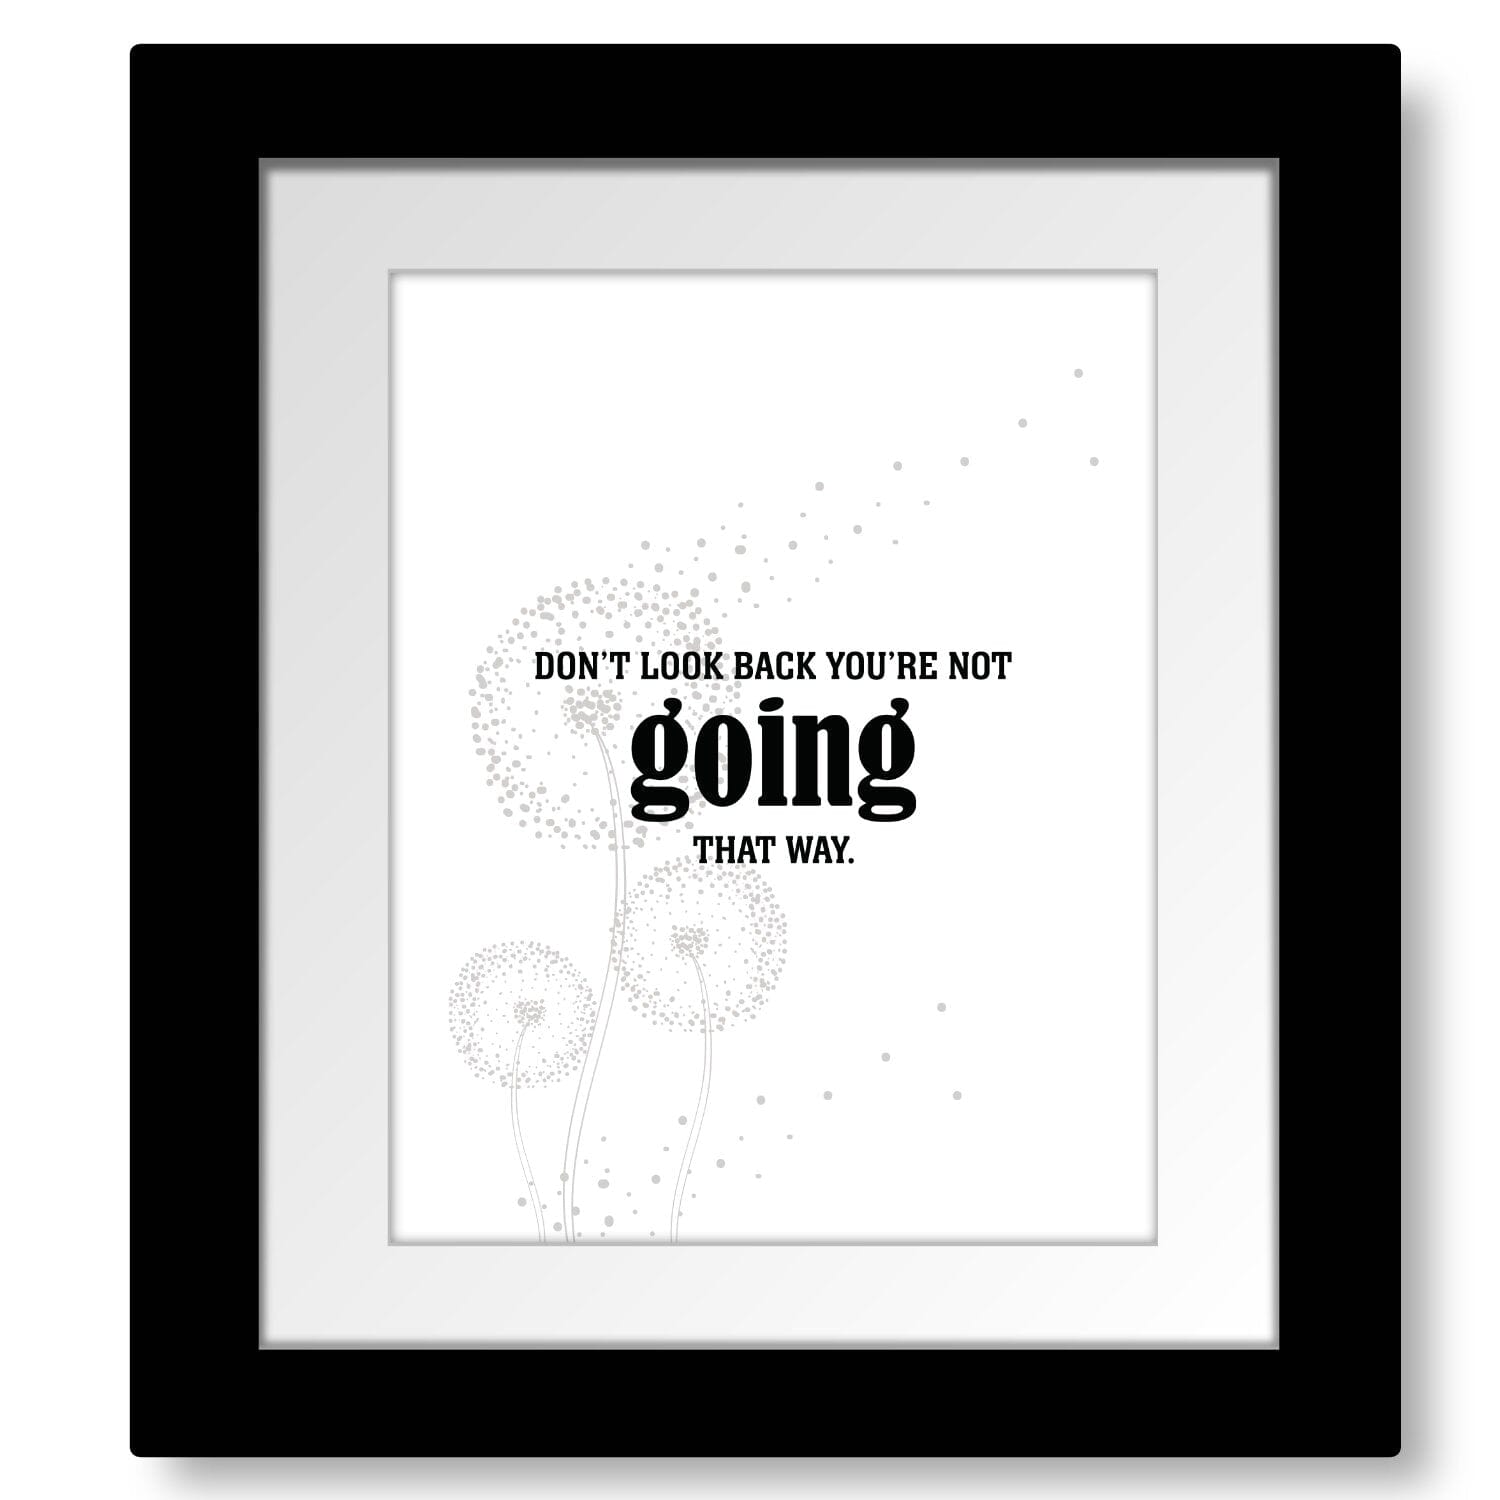 Don't Look Back You're Not Going that Way - Wise Witty Art Wise and Wiseass Quotes Song Lyrics Art 8x10 Framed and Matted Print 